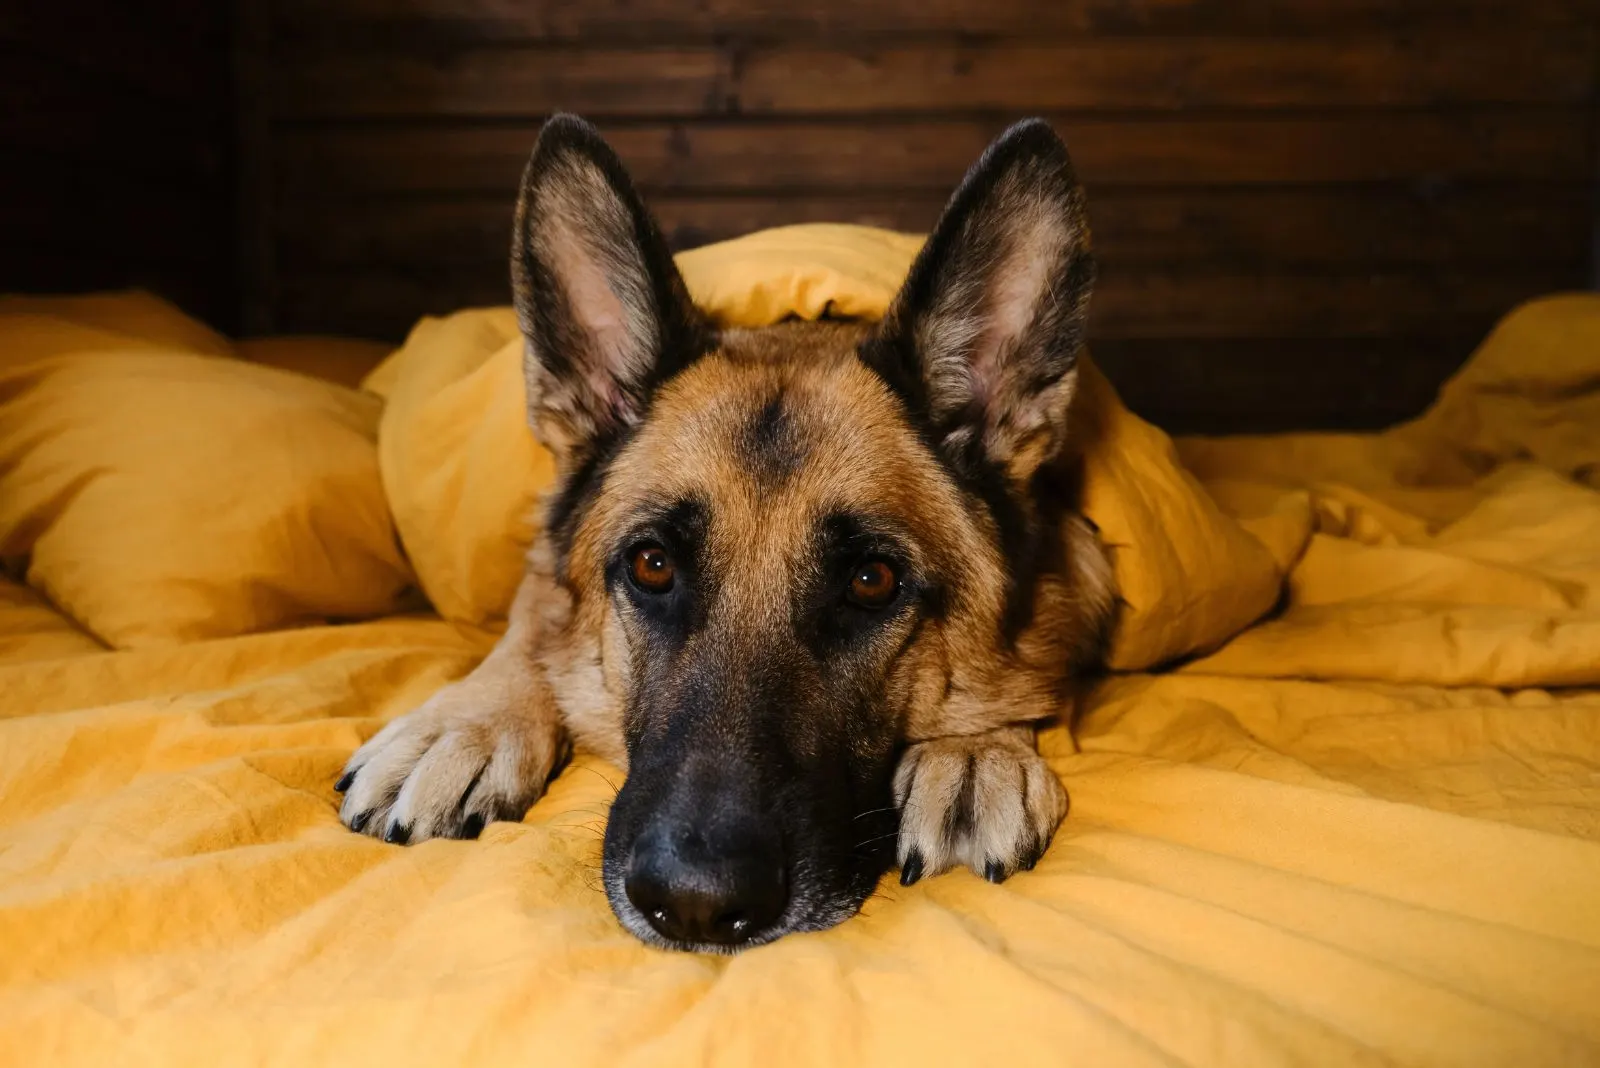 the german shepherd lies on the bed and whimpers